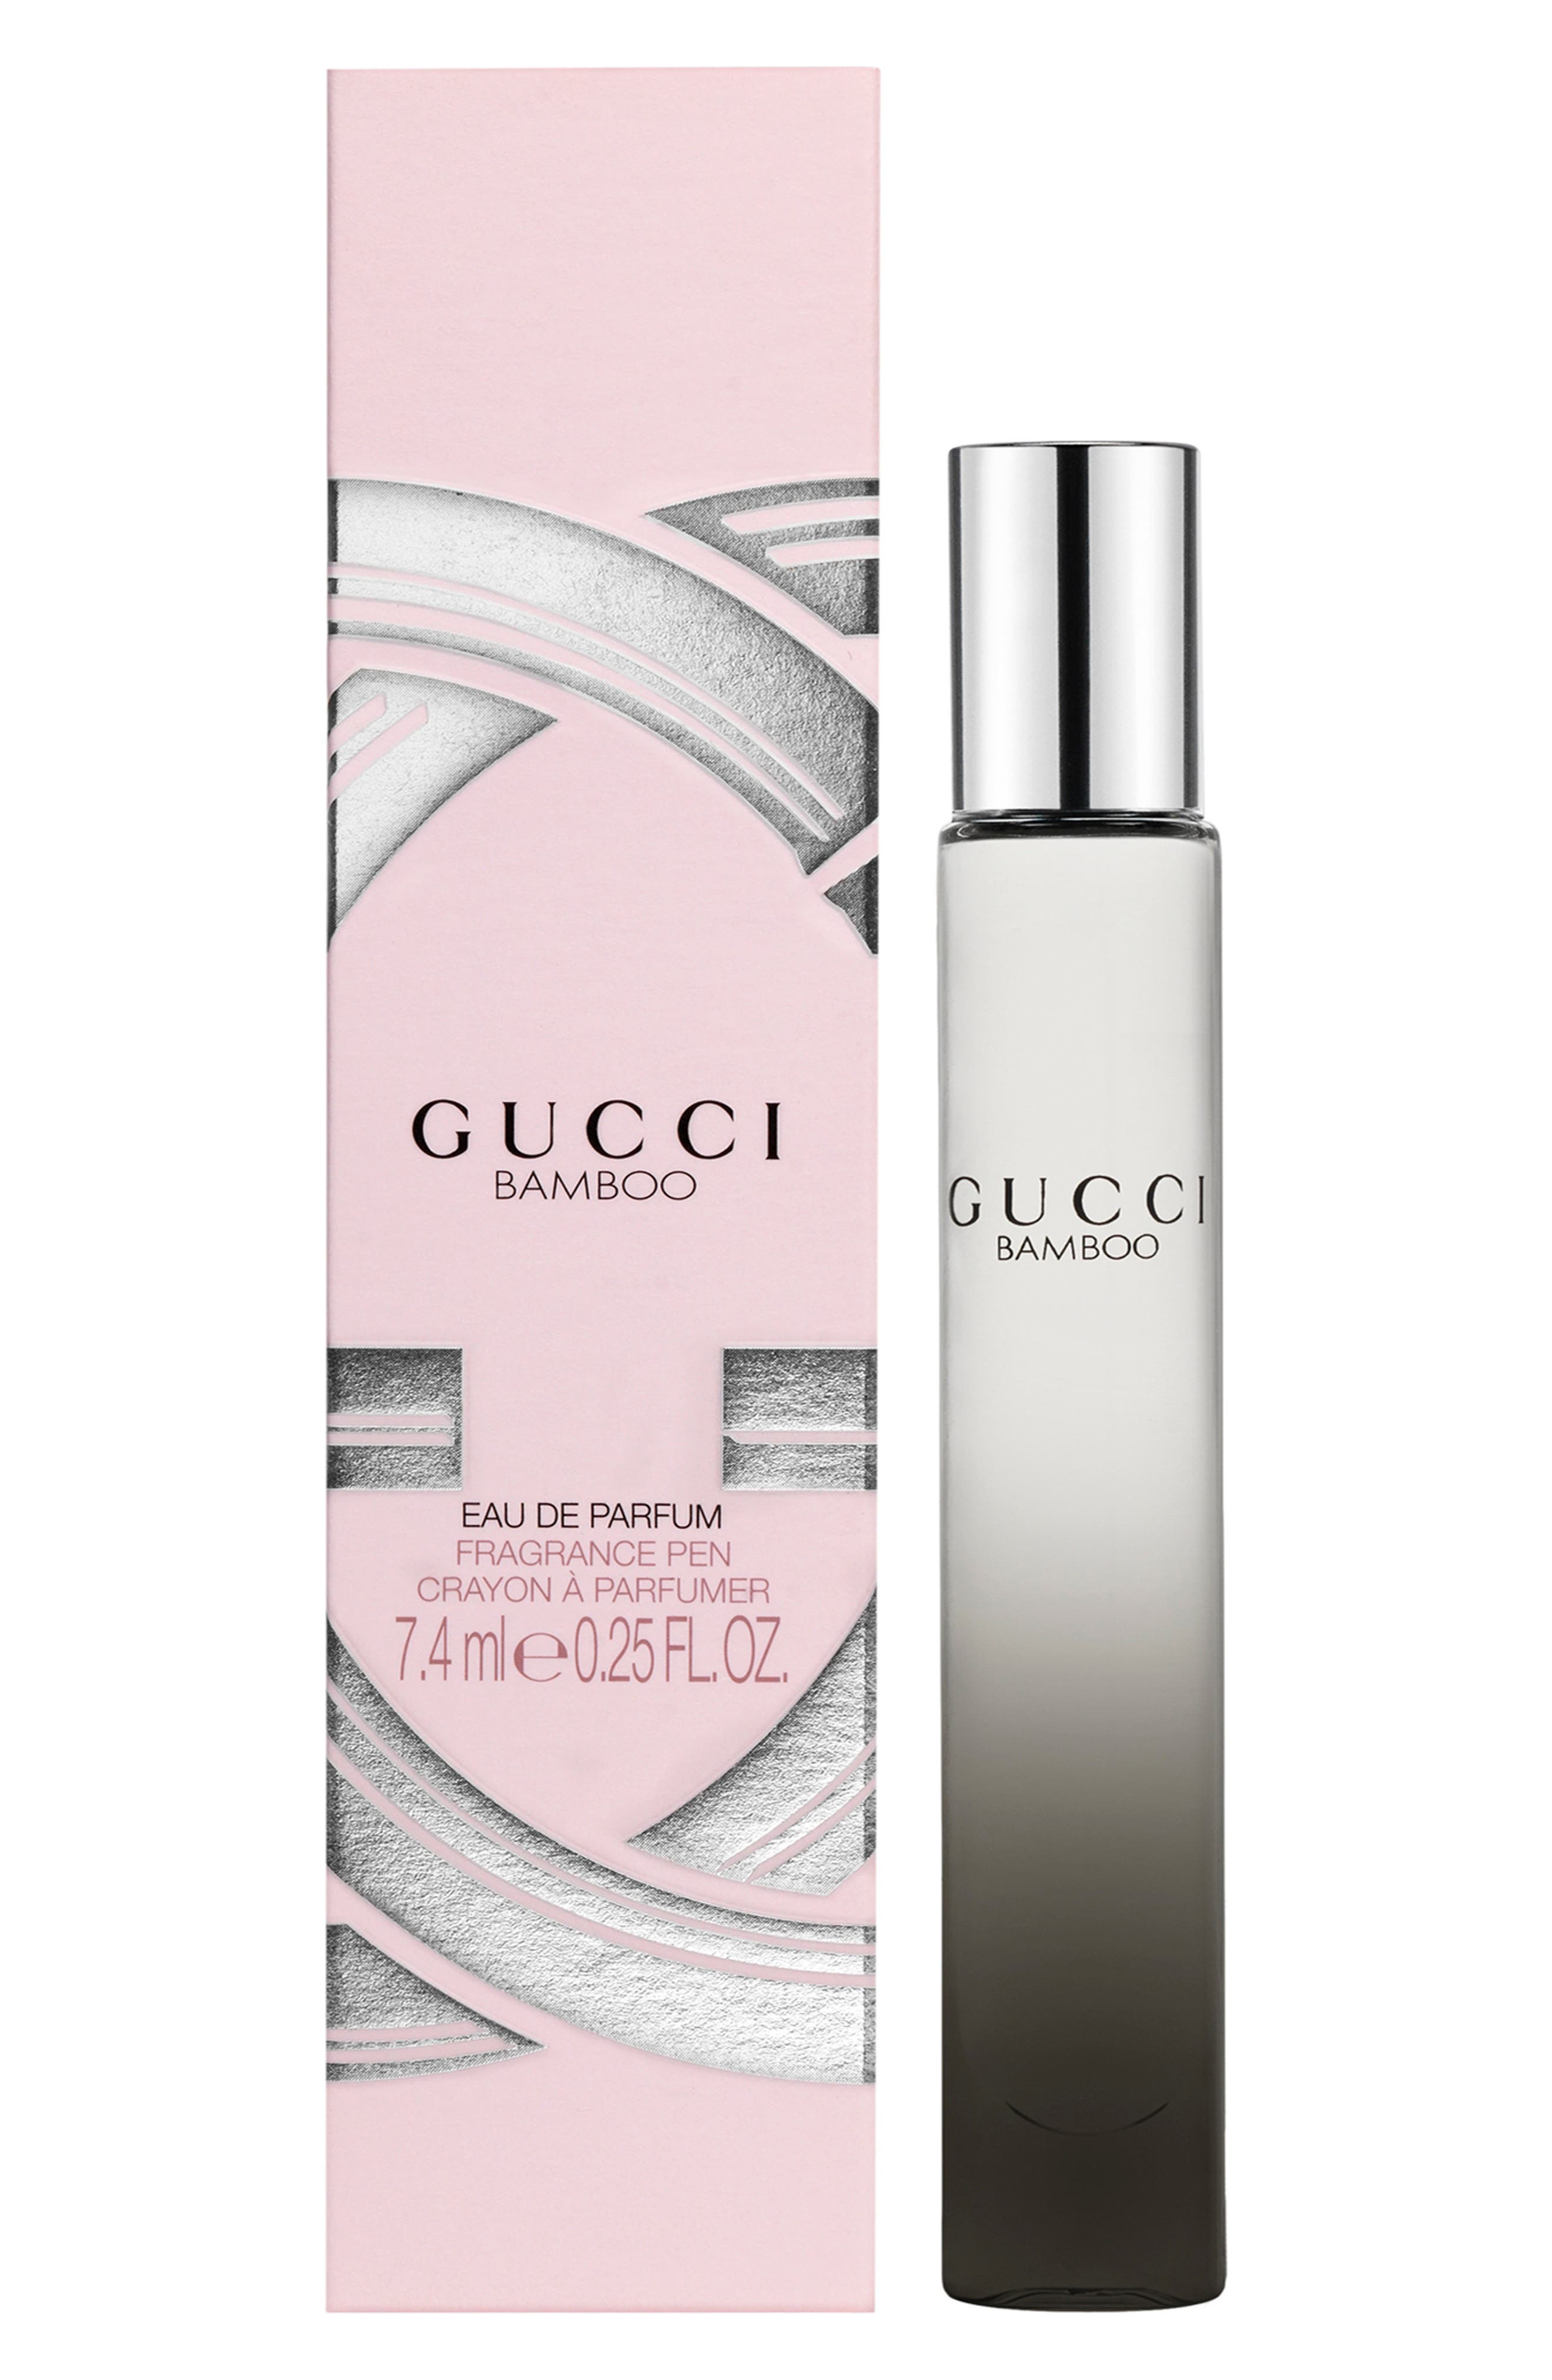 Gucci Travel-Size Beauty: Trial Size 